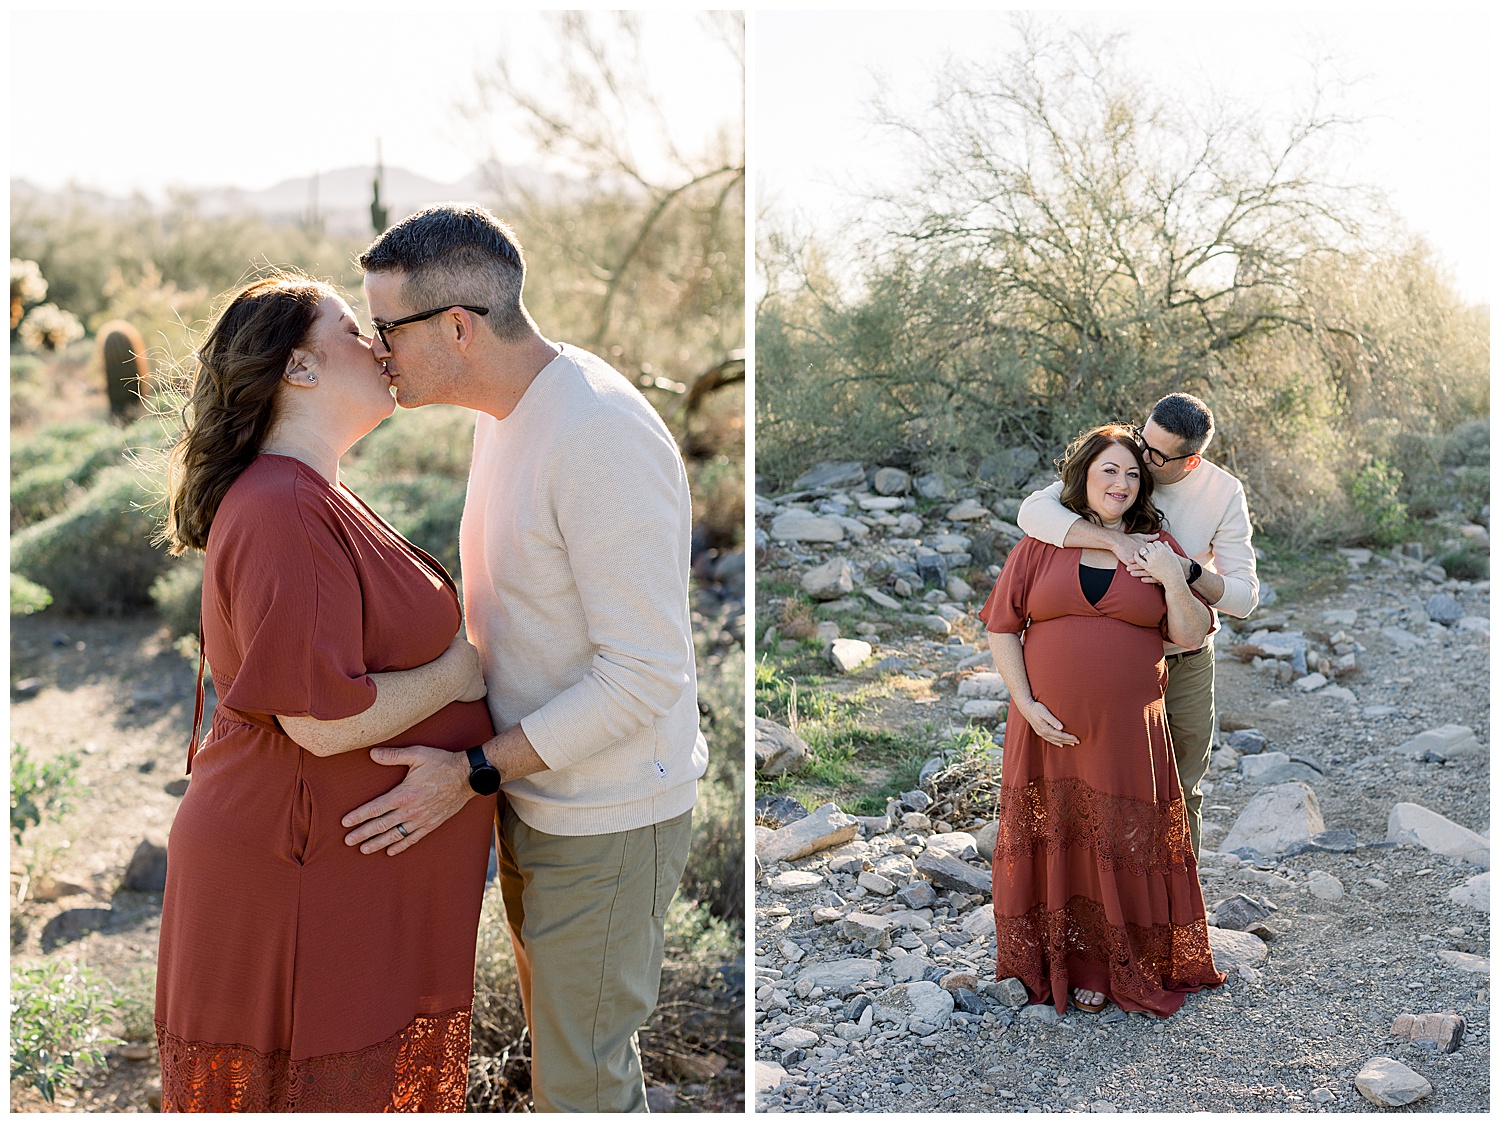 Scottsdale Arizona Maternity Photos in the Desert, Rust and Neutral Color Palette